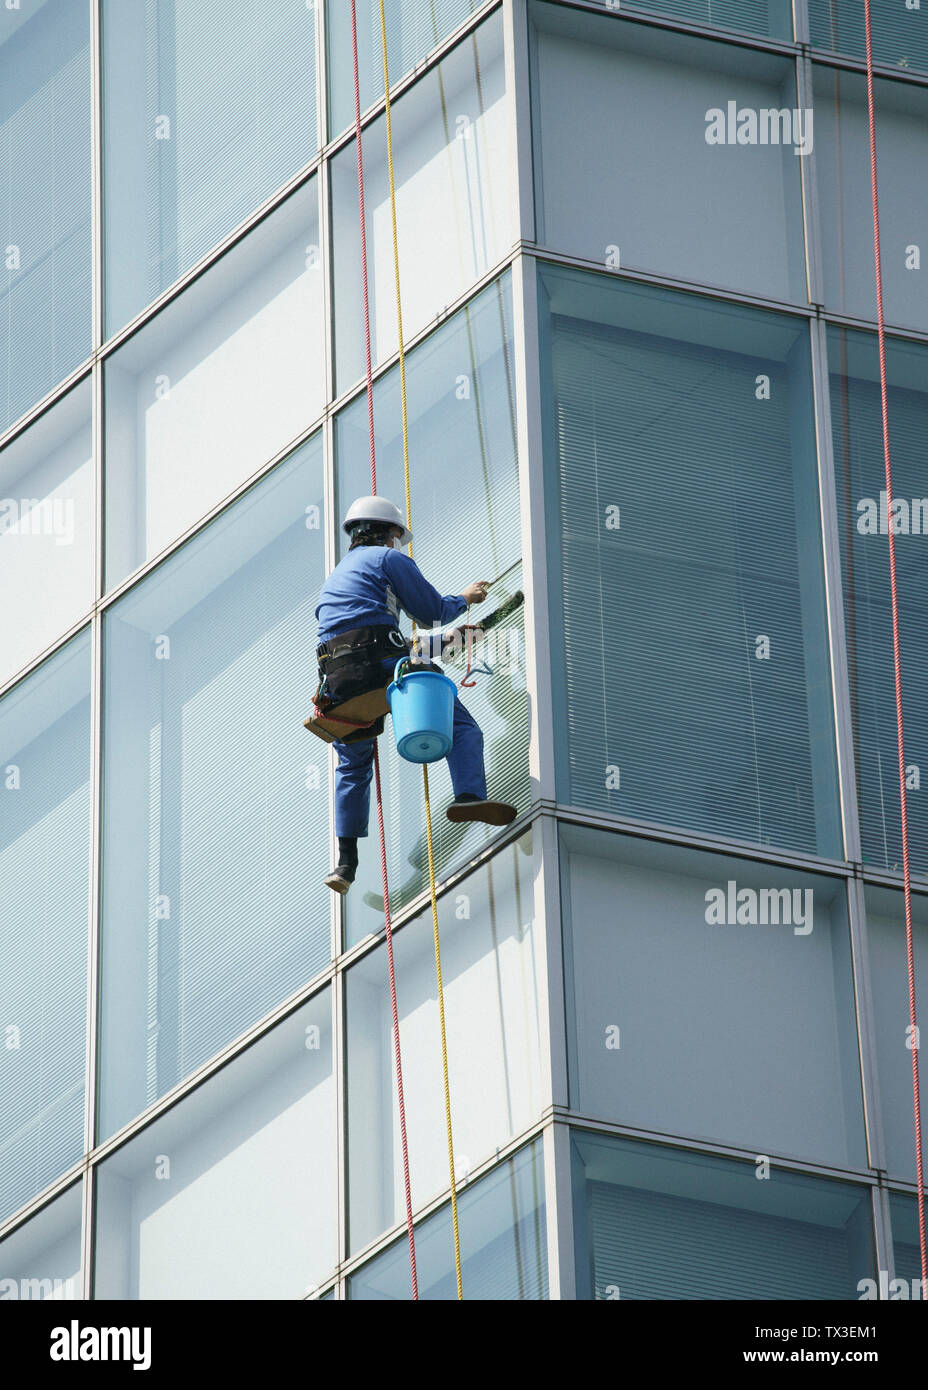 Harnessed window washer cleaning highrise windows Stock Photo